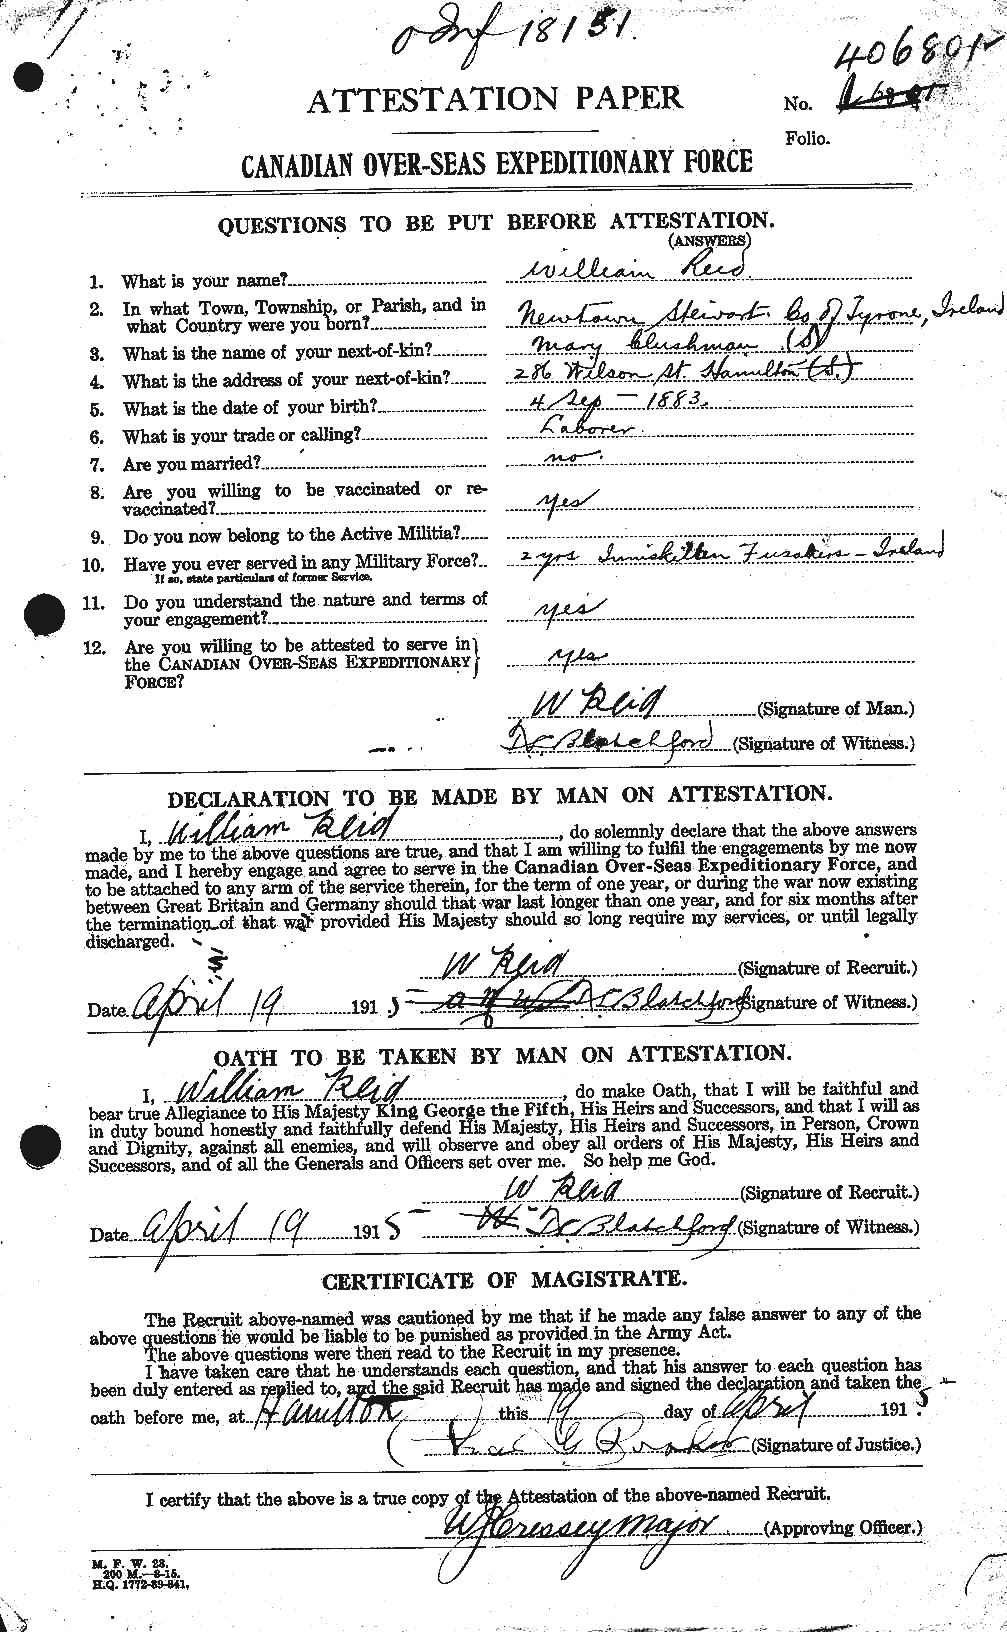 Personnel Records of the First World War - CEF 596953a